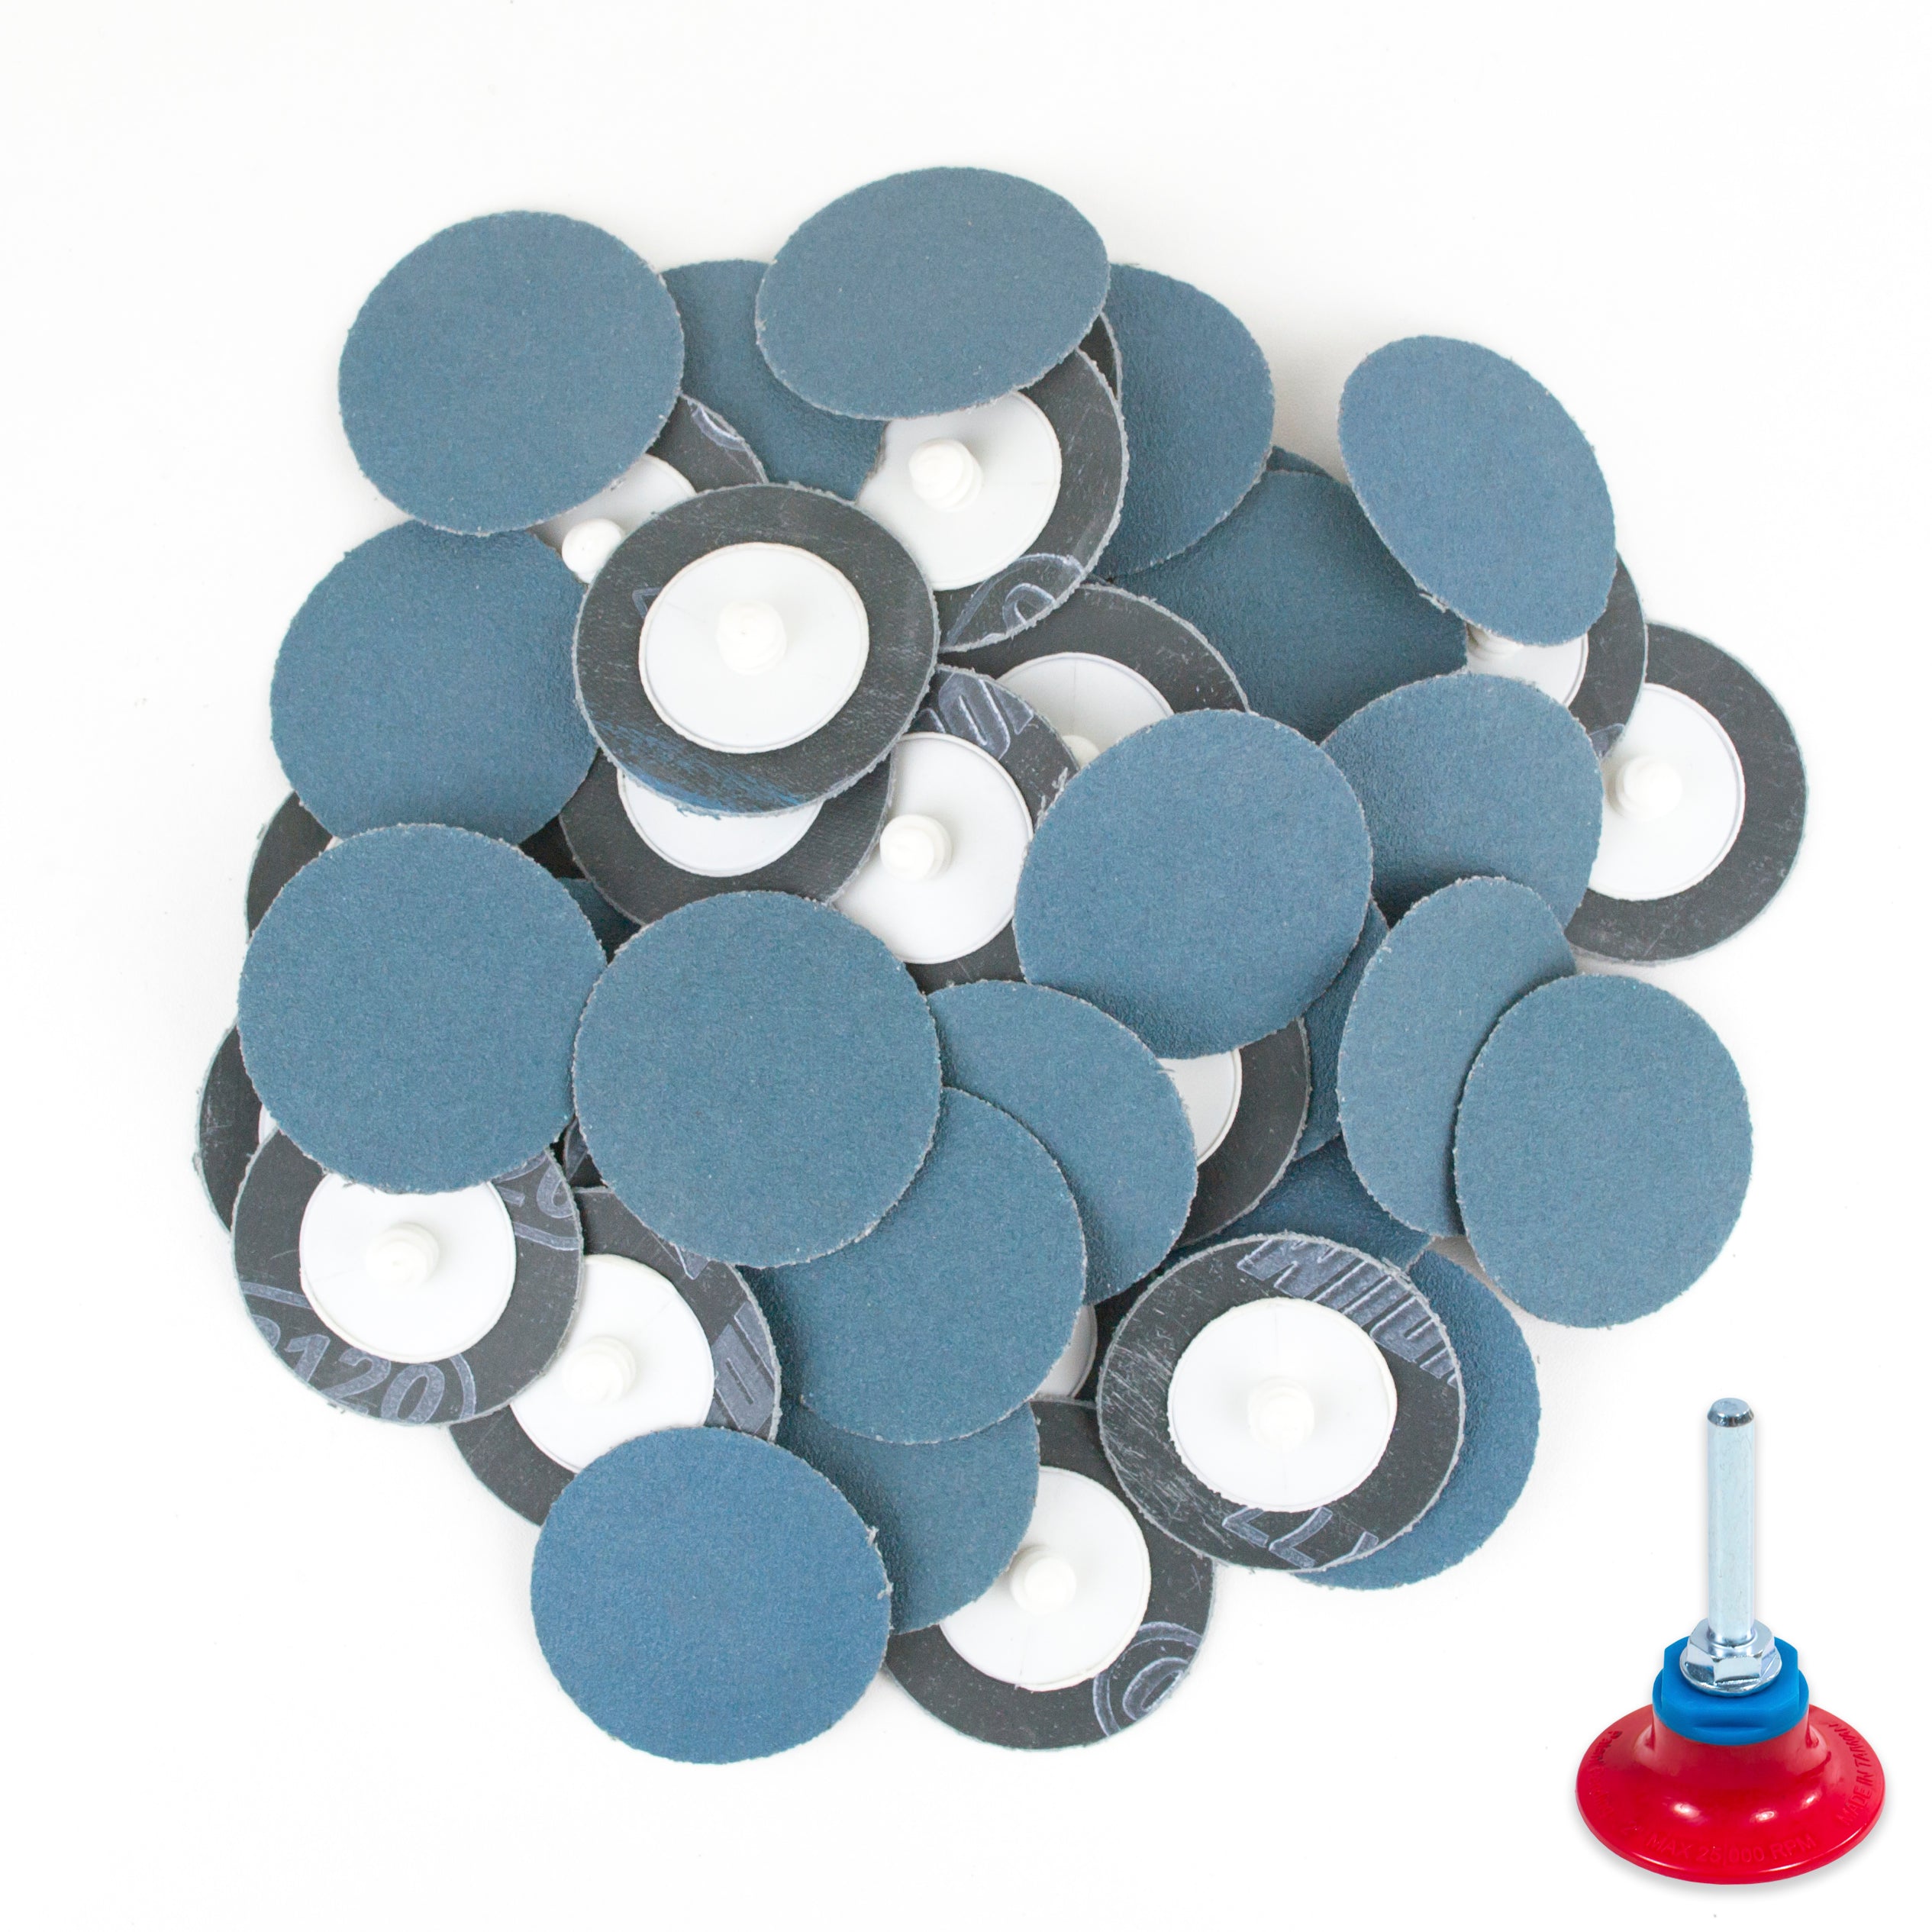 50 pcs 2 inch 24 Grit Zirconia “Roloc” Roll-On Sanding Discs with Holder 